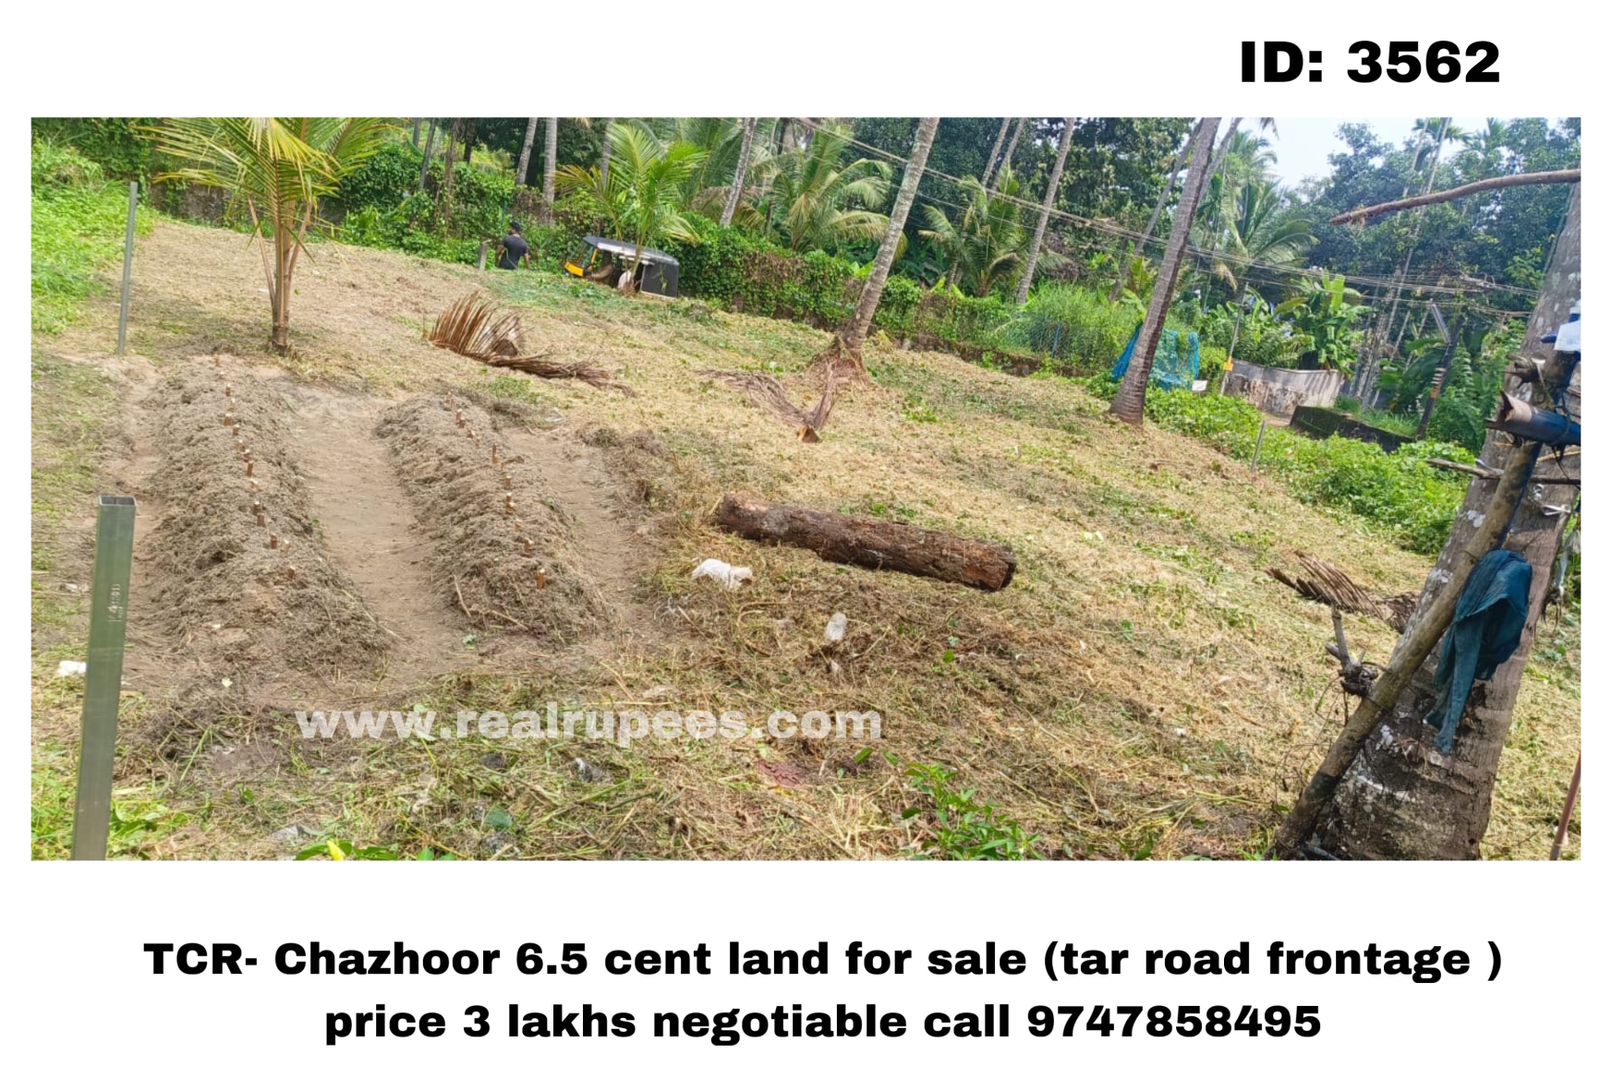 TCR- Chazhoor 6.5 cent land for sale 